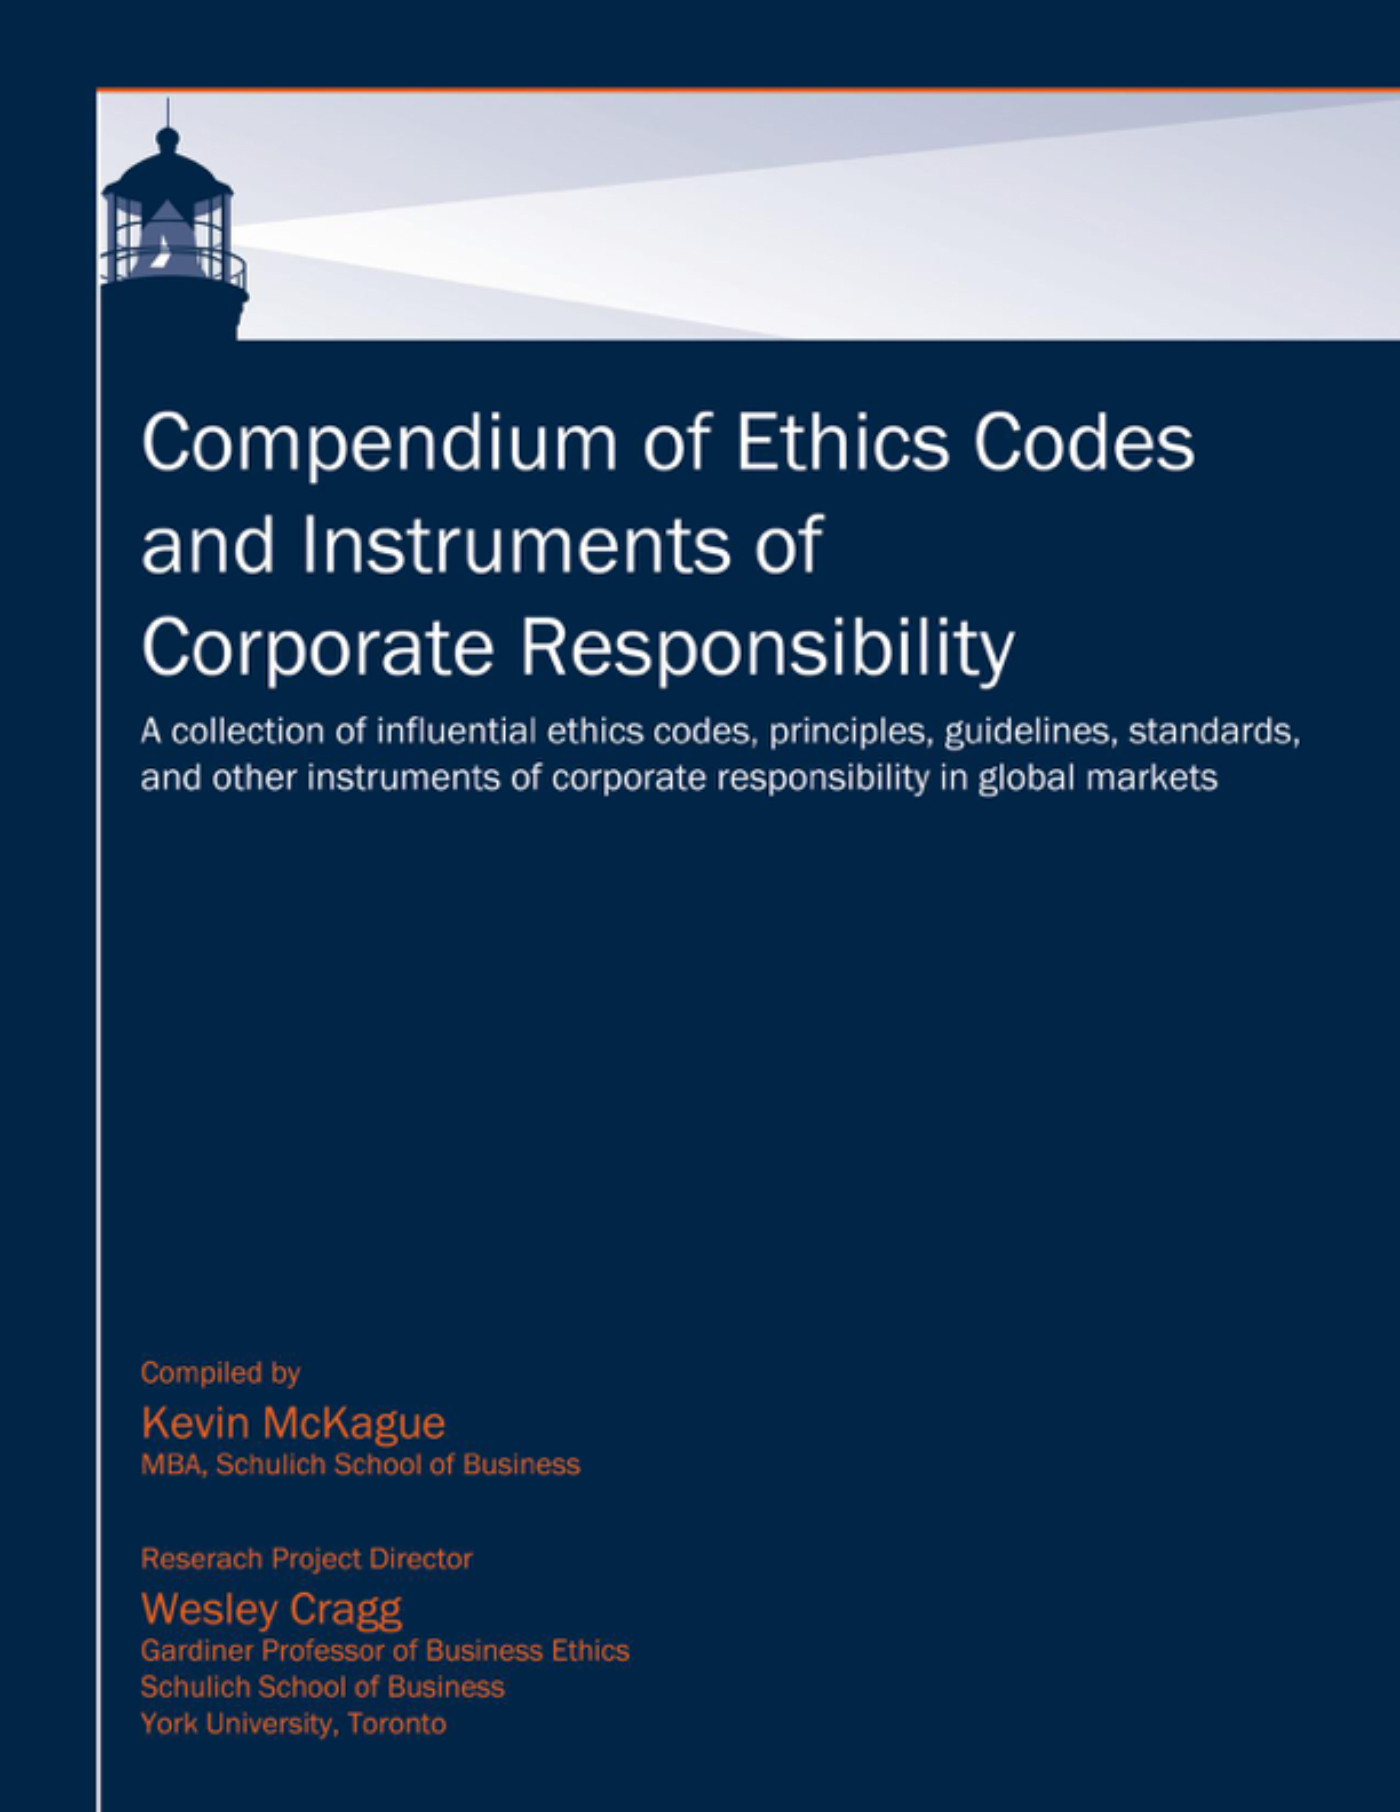 Compendium of Ethics Codes and Instruments of Corporate Responsibility